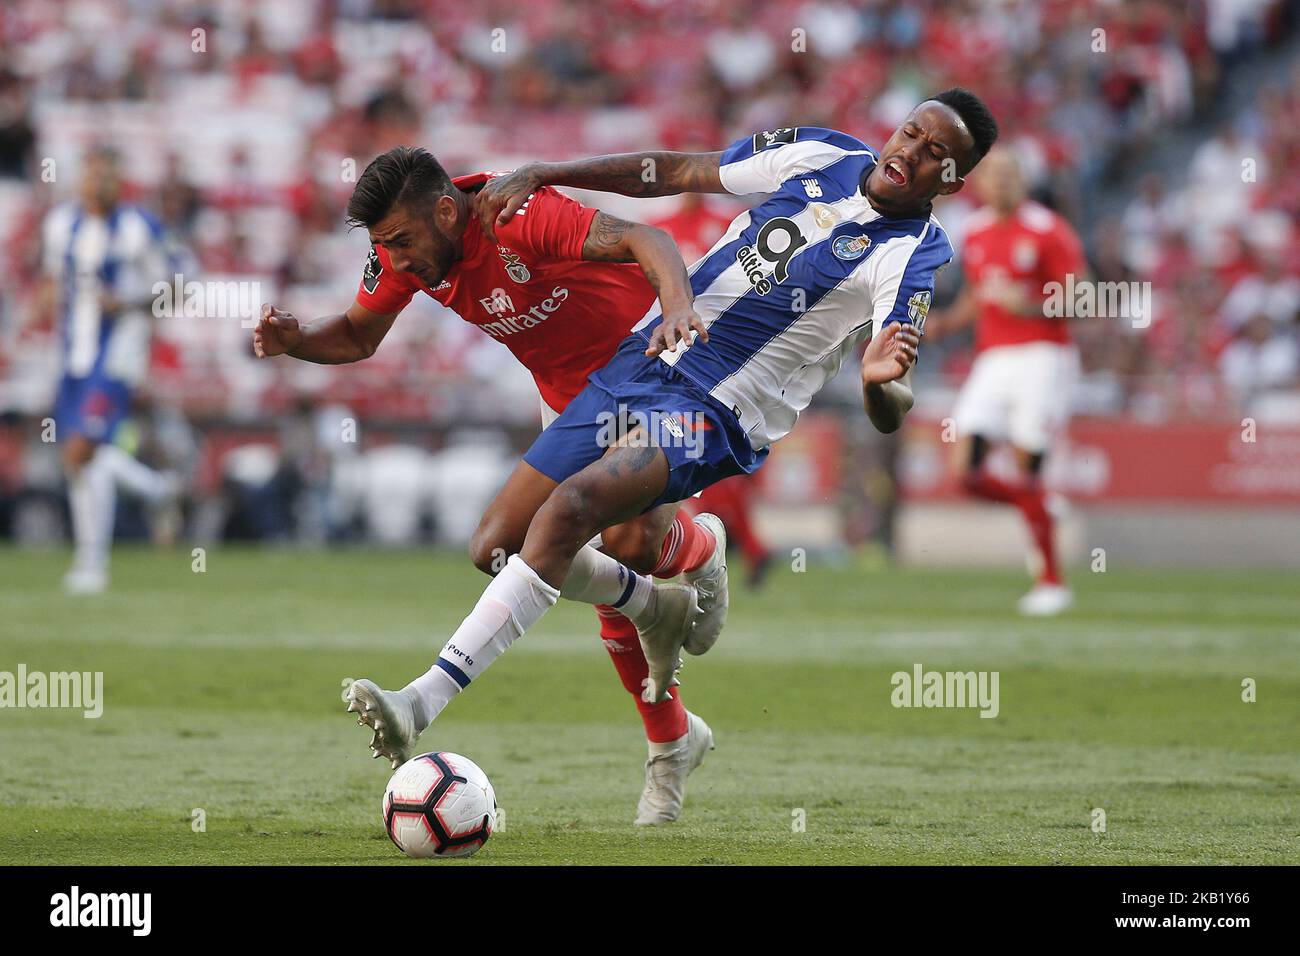 Eduardo Salvio of Benfica (L) vies for the ball with Eder Militao of Porto (R) during the Portuguese League football match between SL Benfica and FC Porto at Luz Stadium in Lisbon, Portugal on October 7, 2018. (Photo by Carlos Palma/NurPhoto) Stock Photo